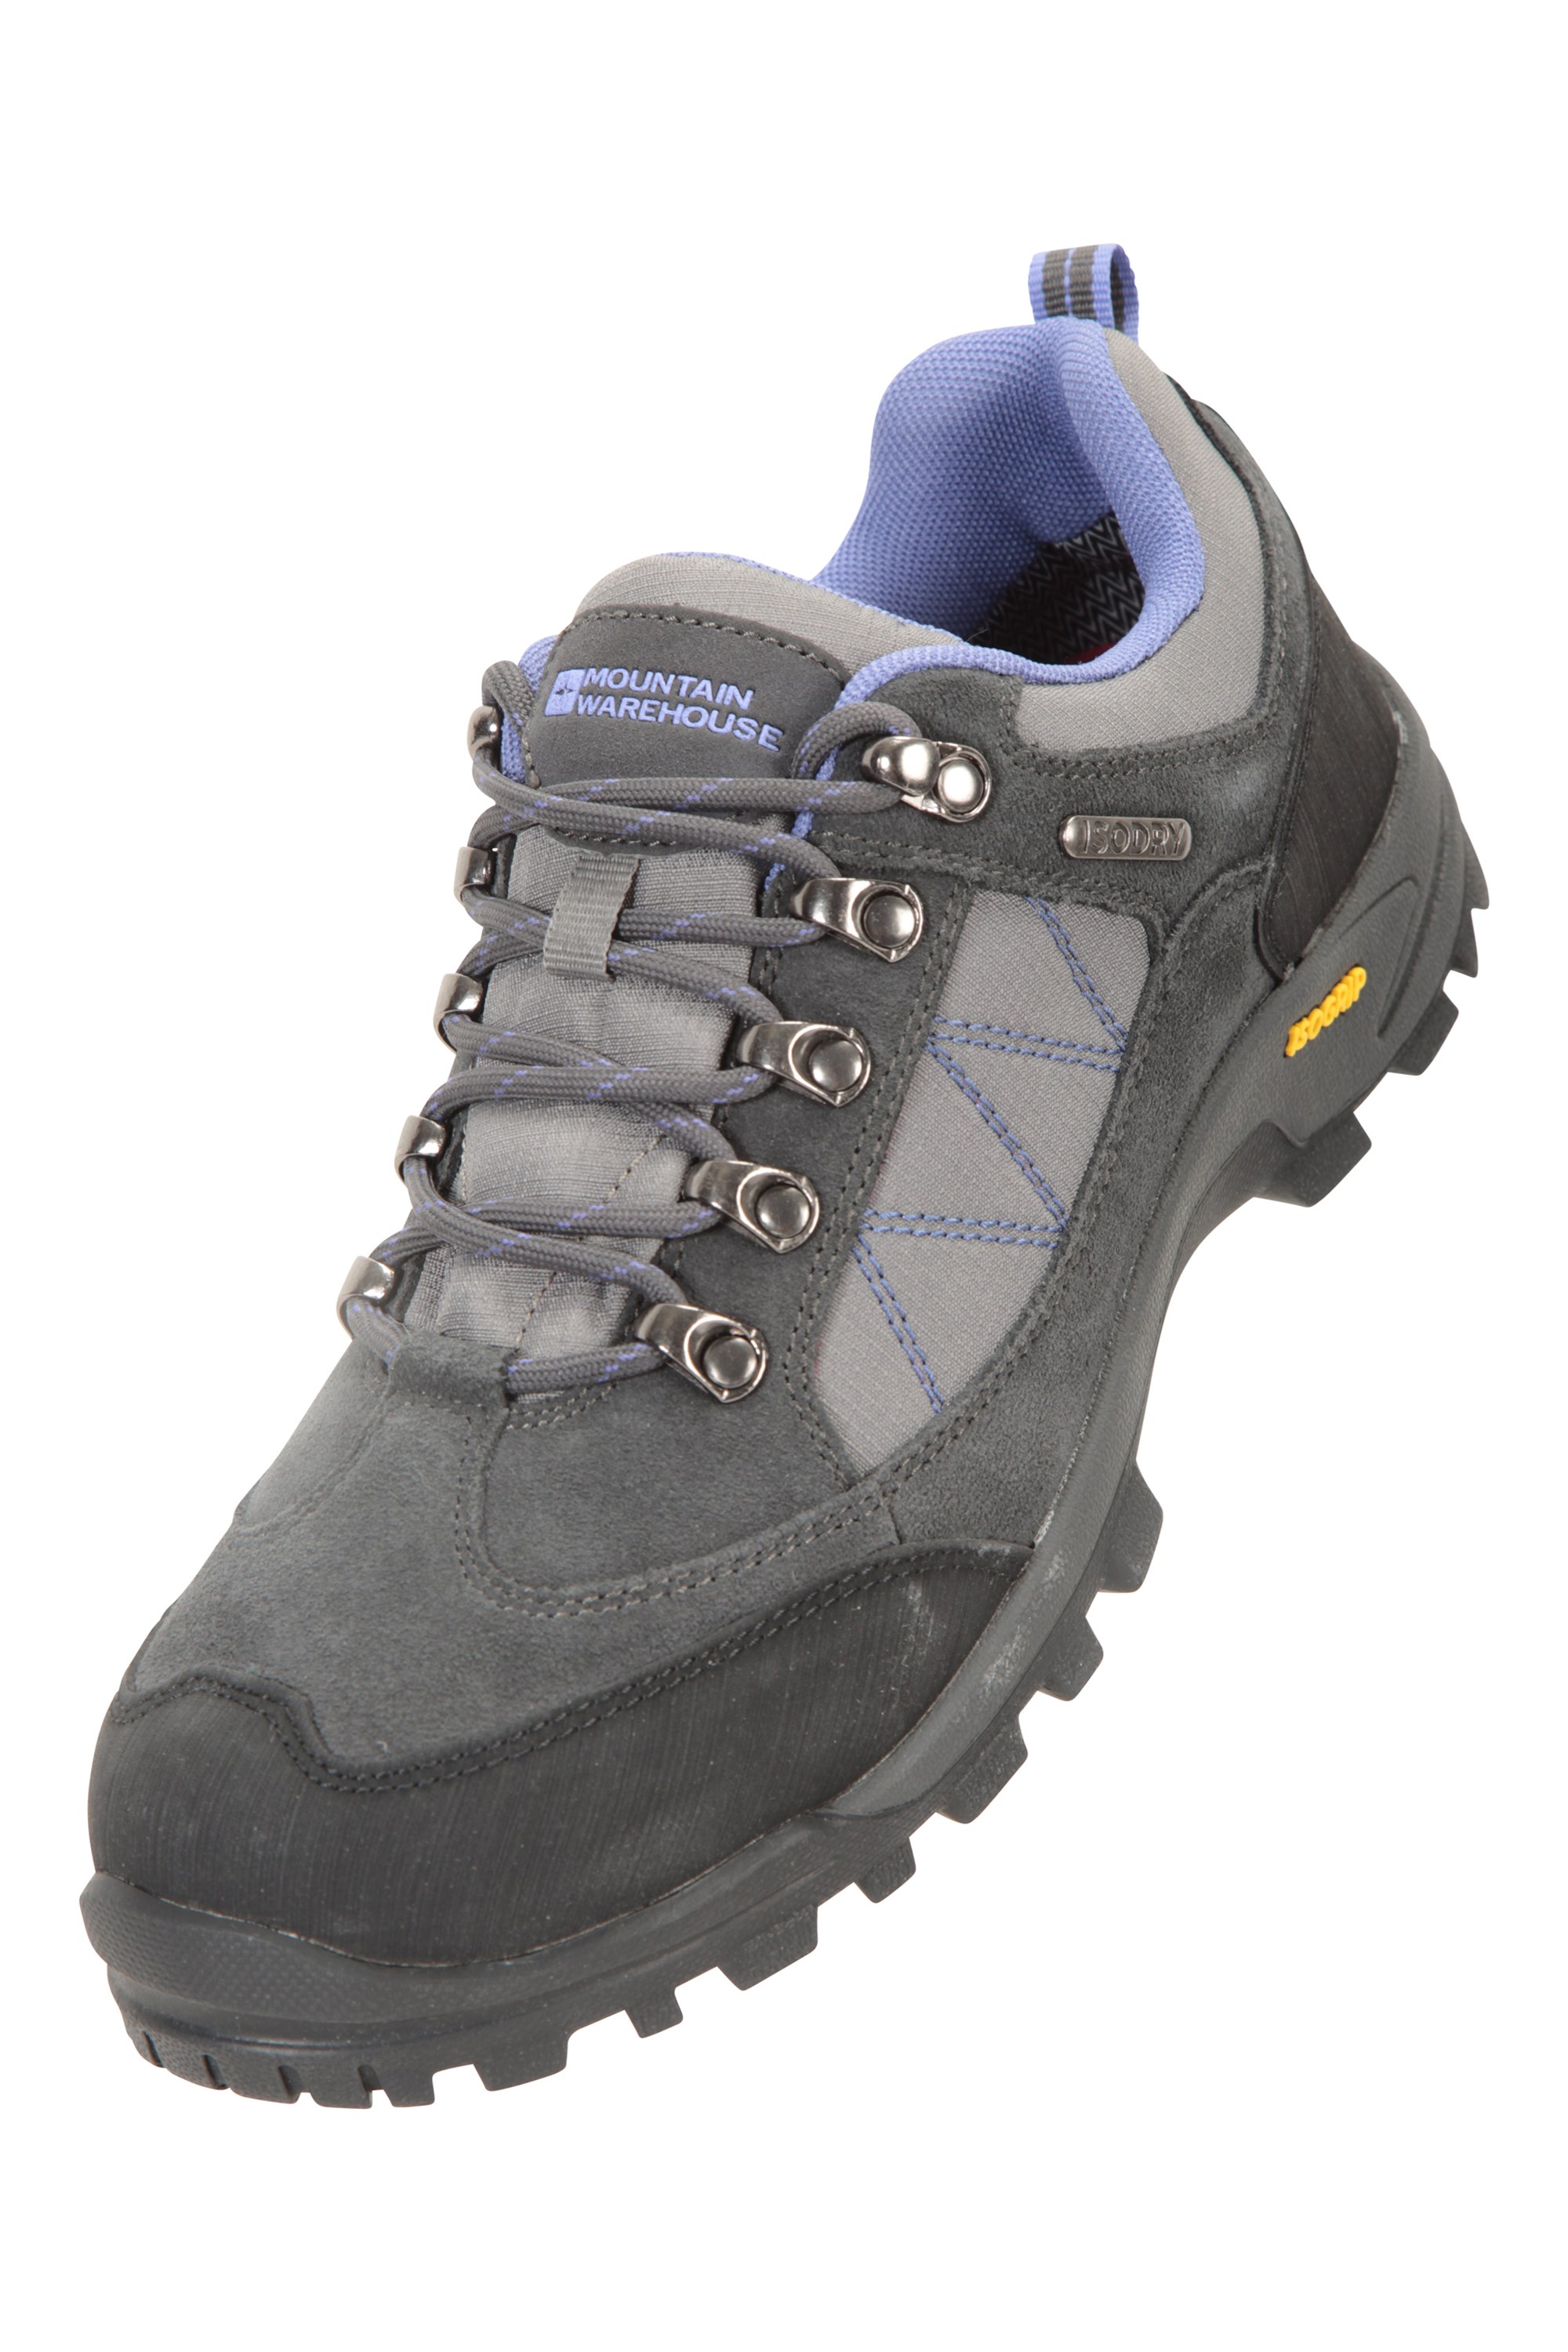 Mountain Warehouse Mountain Warehouse Womens Extreme Storm Shoes Ladies Waterproof Hiking Boots 